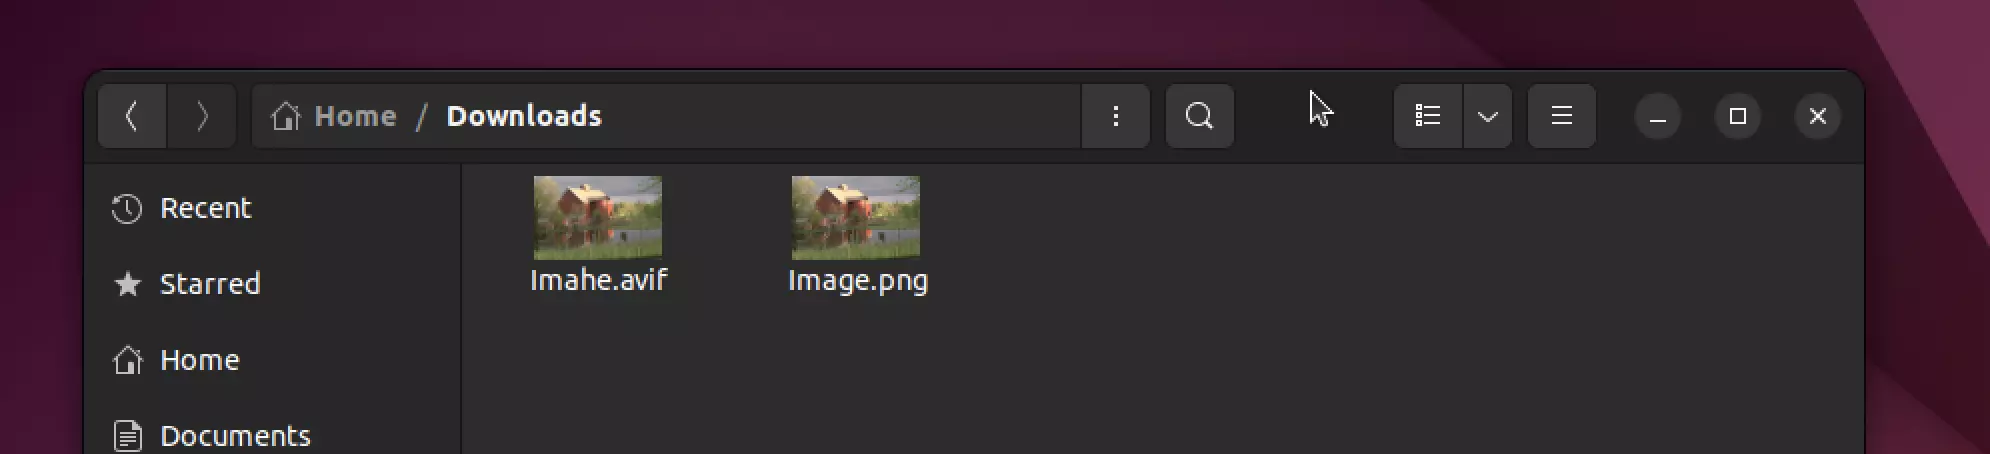 gThumb arranges all images in the same folder as thumbnails